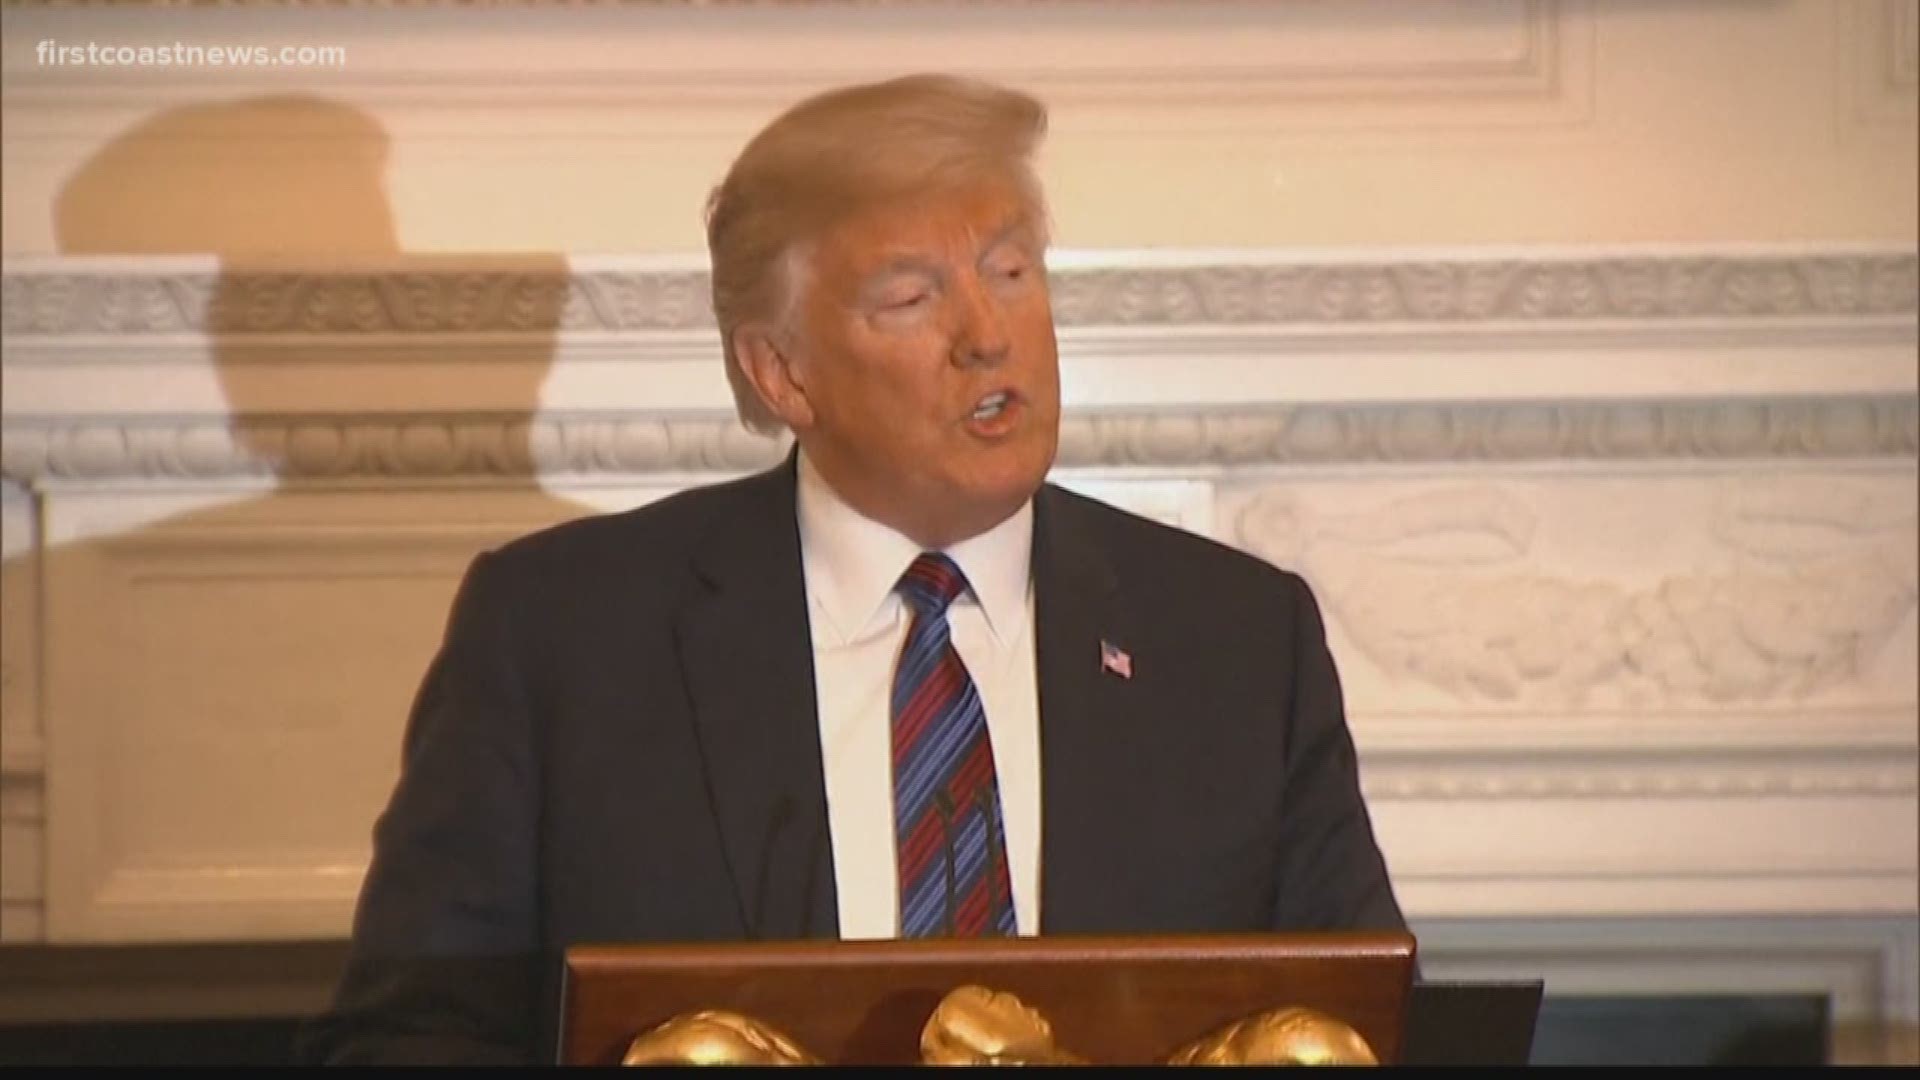 President Donald Trump addressed the shooting at the Jacksonville Landing during a dinner event with evangelical leaders Monday night.